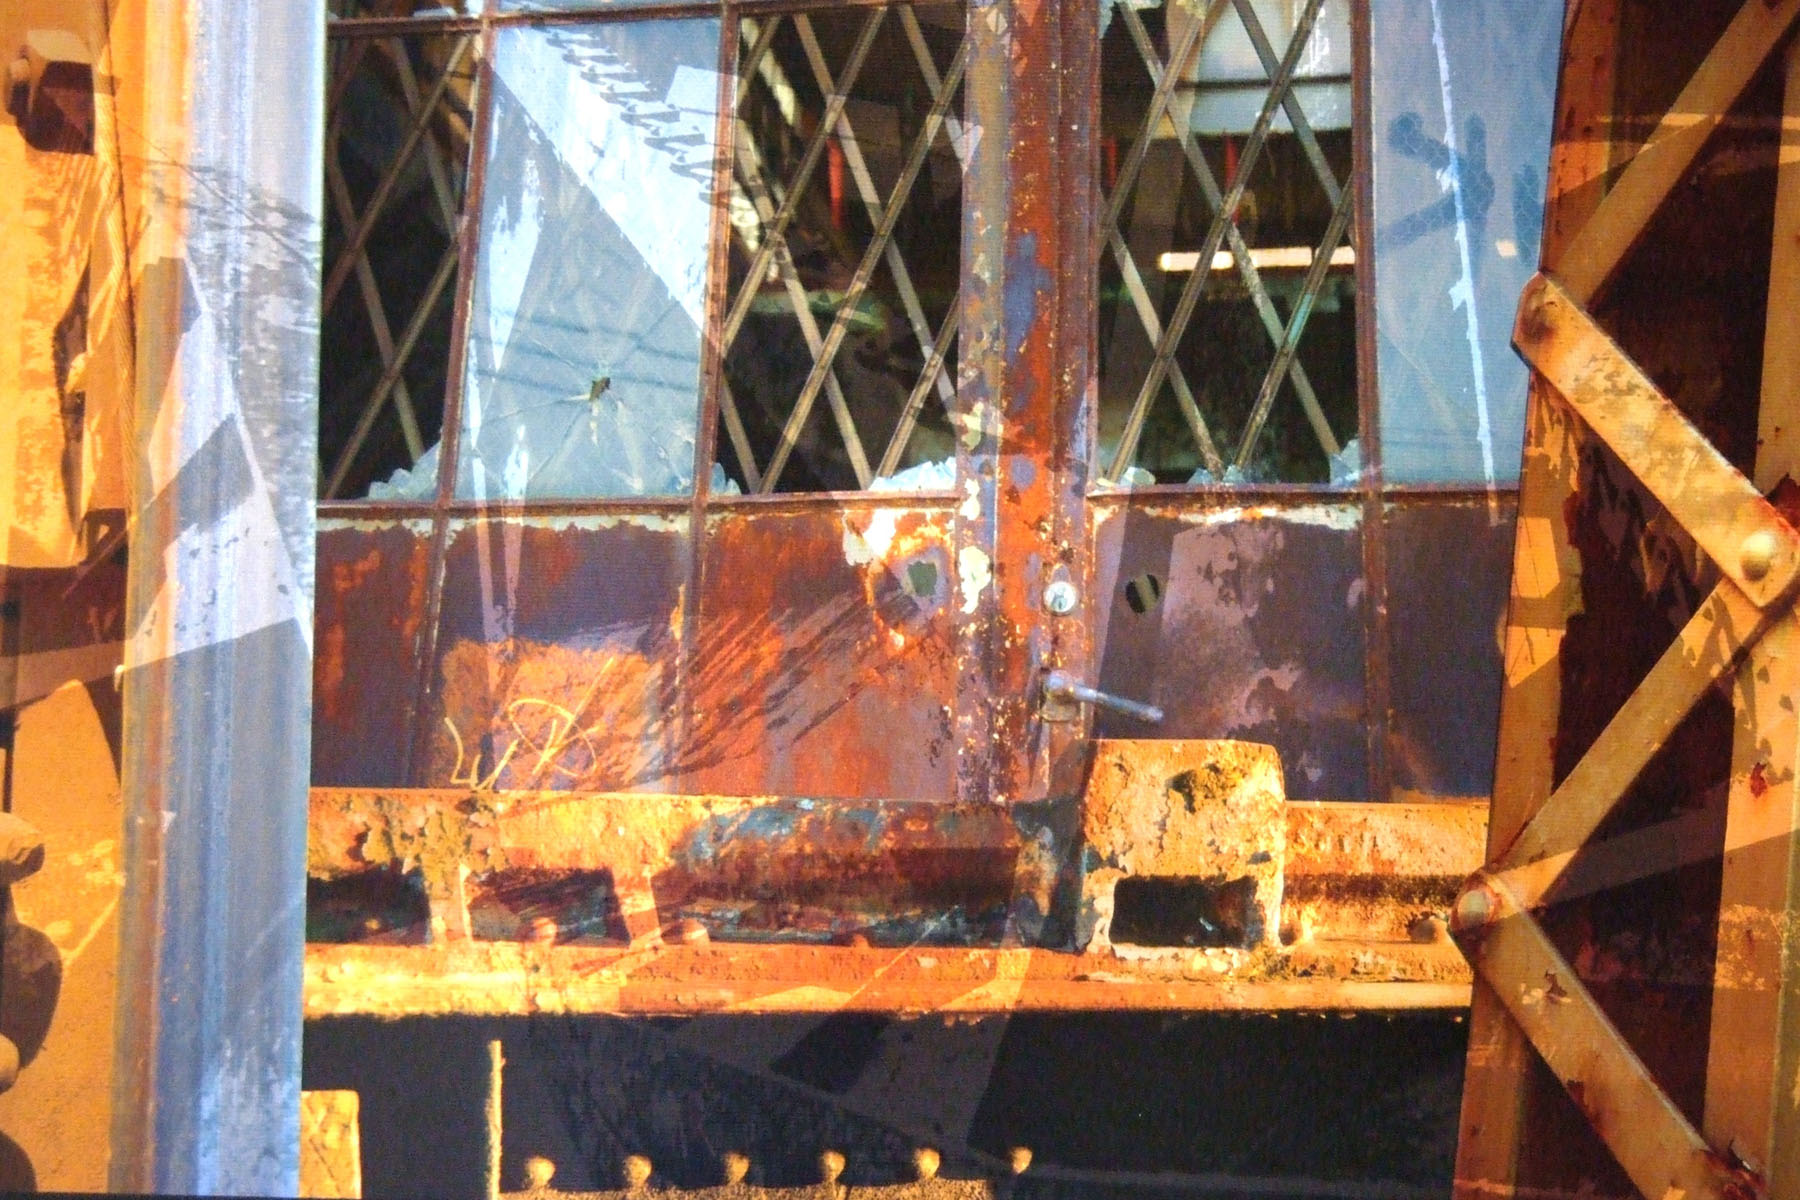 Rusted beams of a building that has no glass in the windows